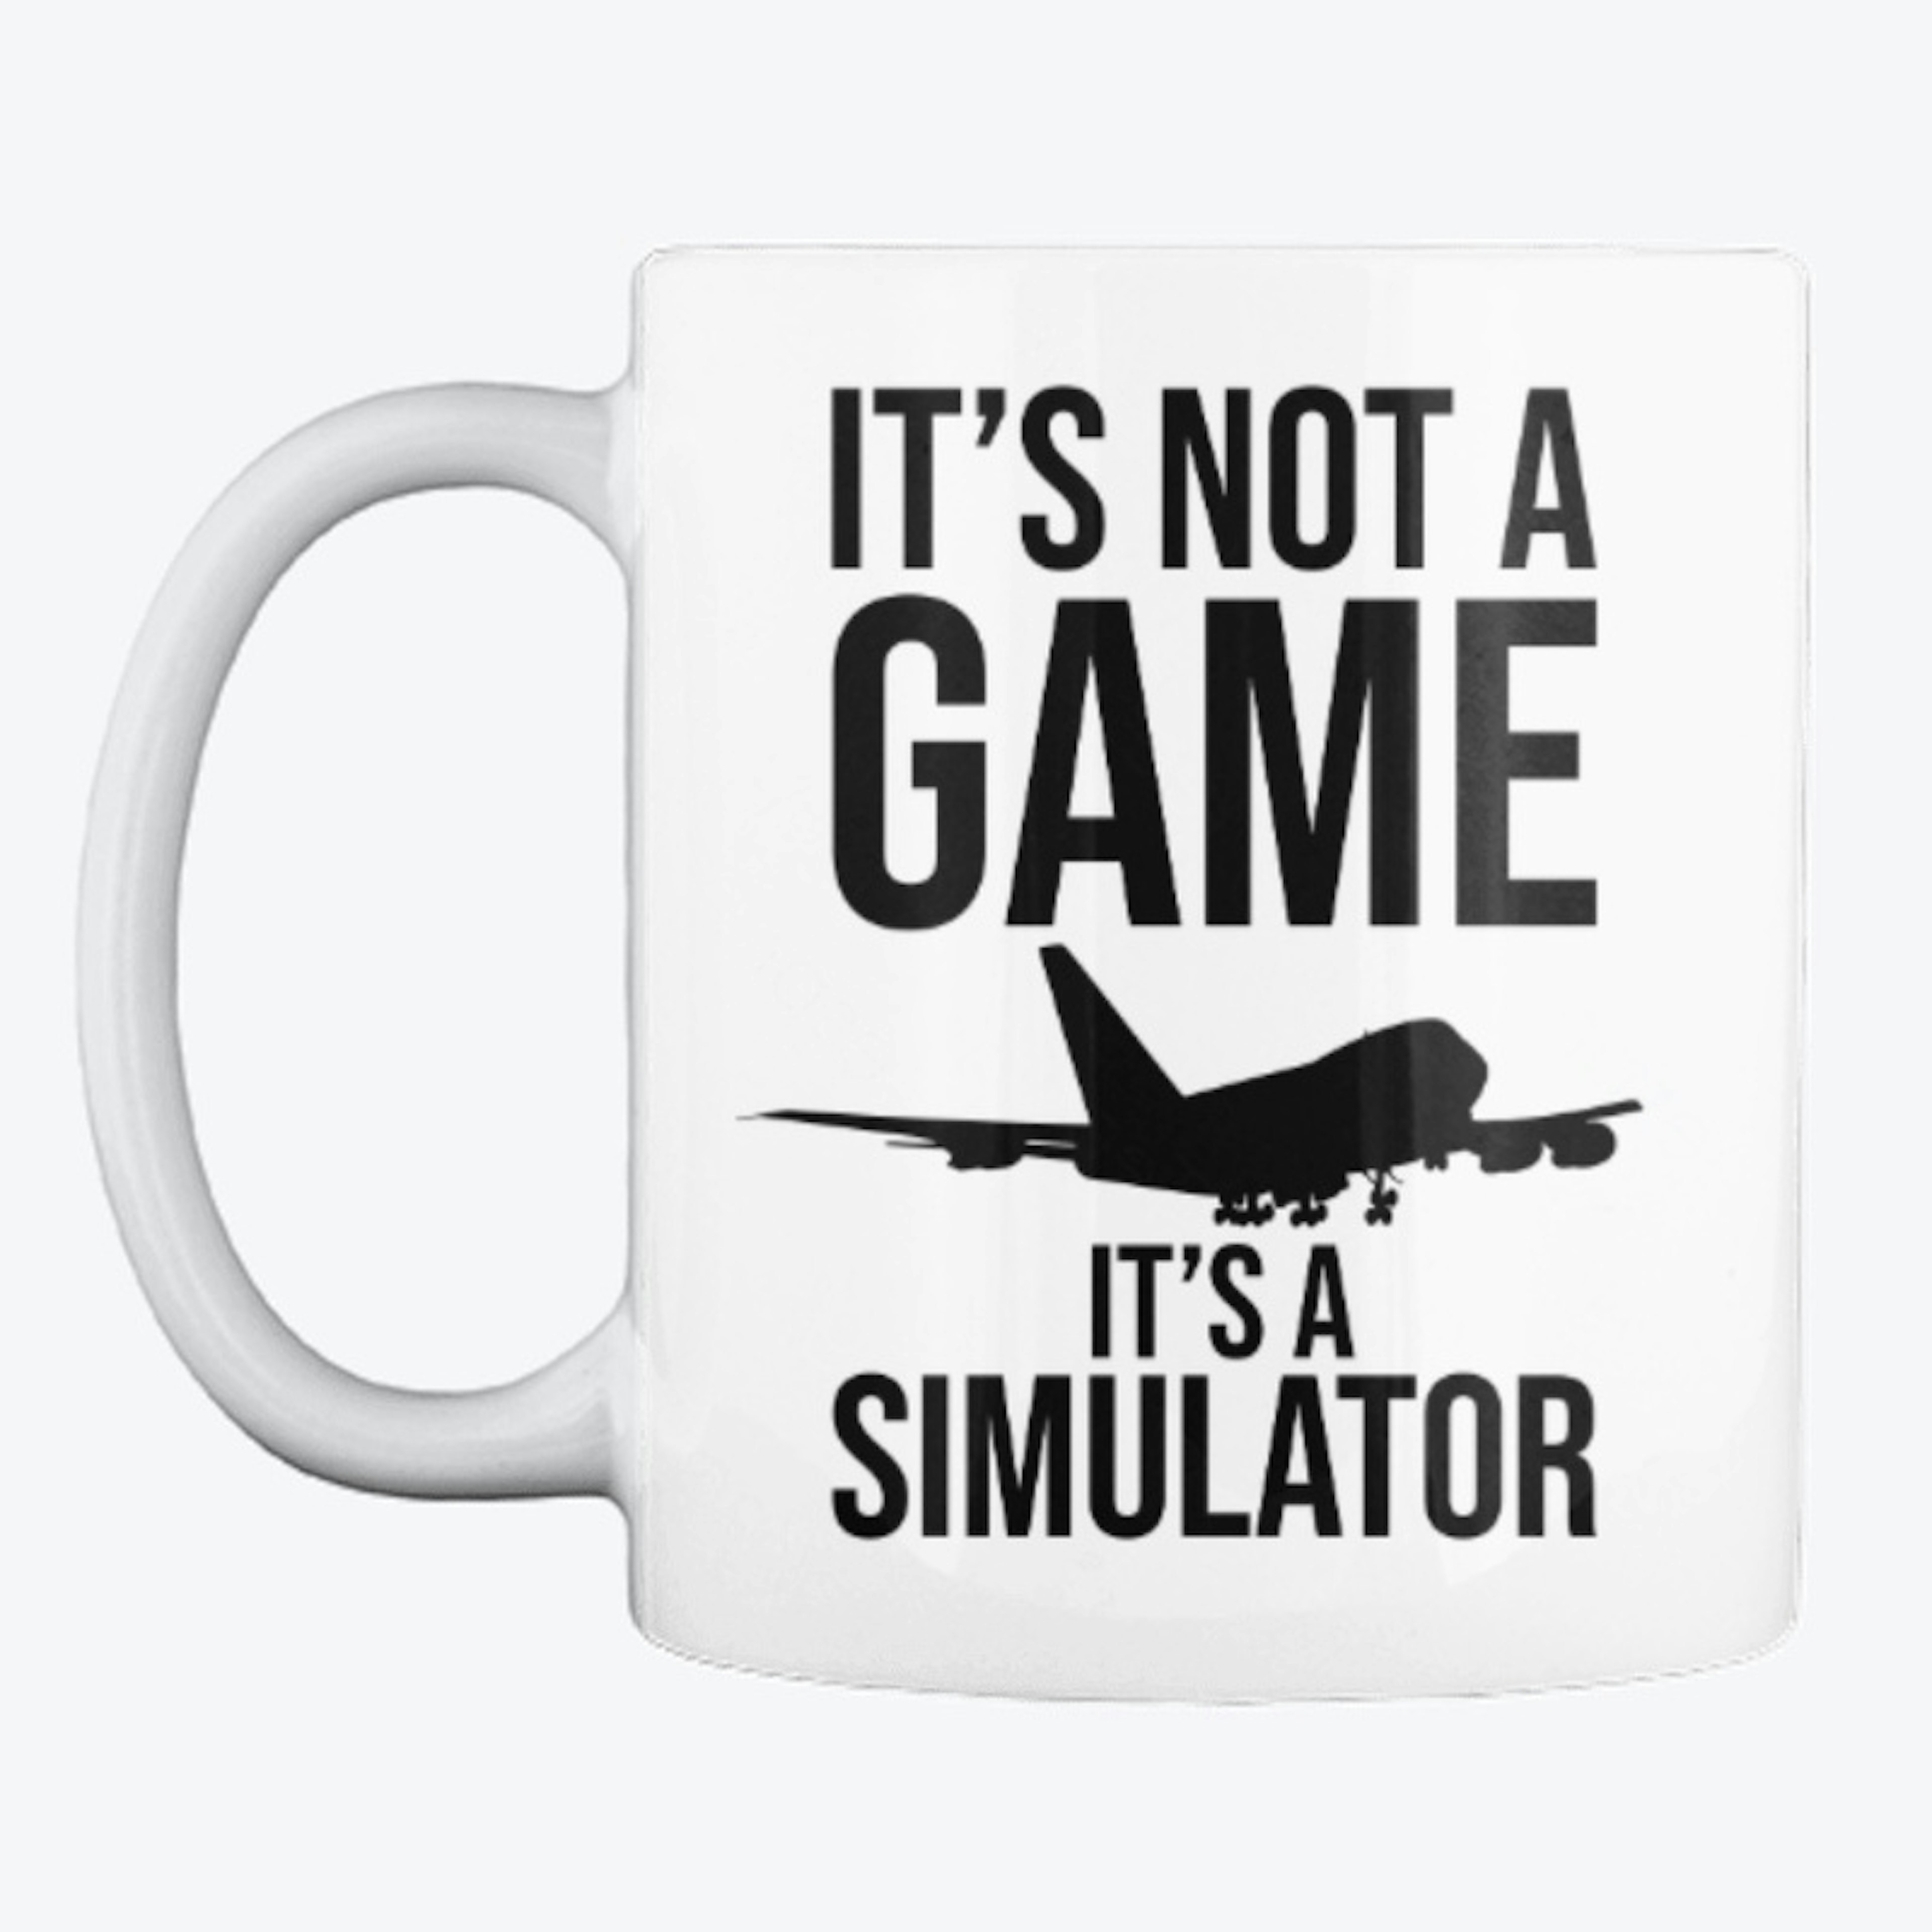 It's not a game, it's a simulator